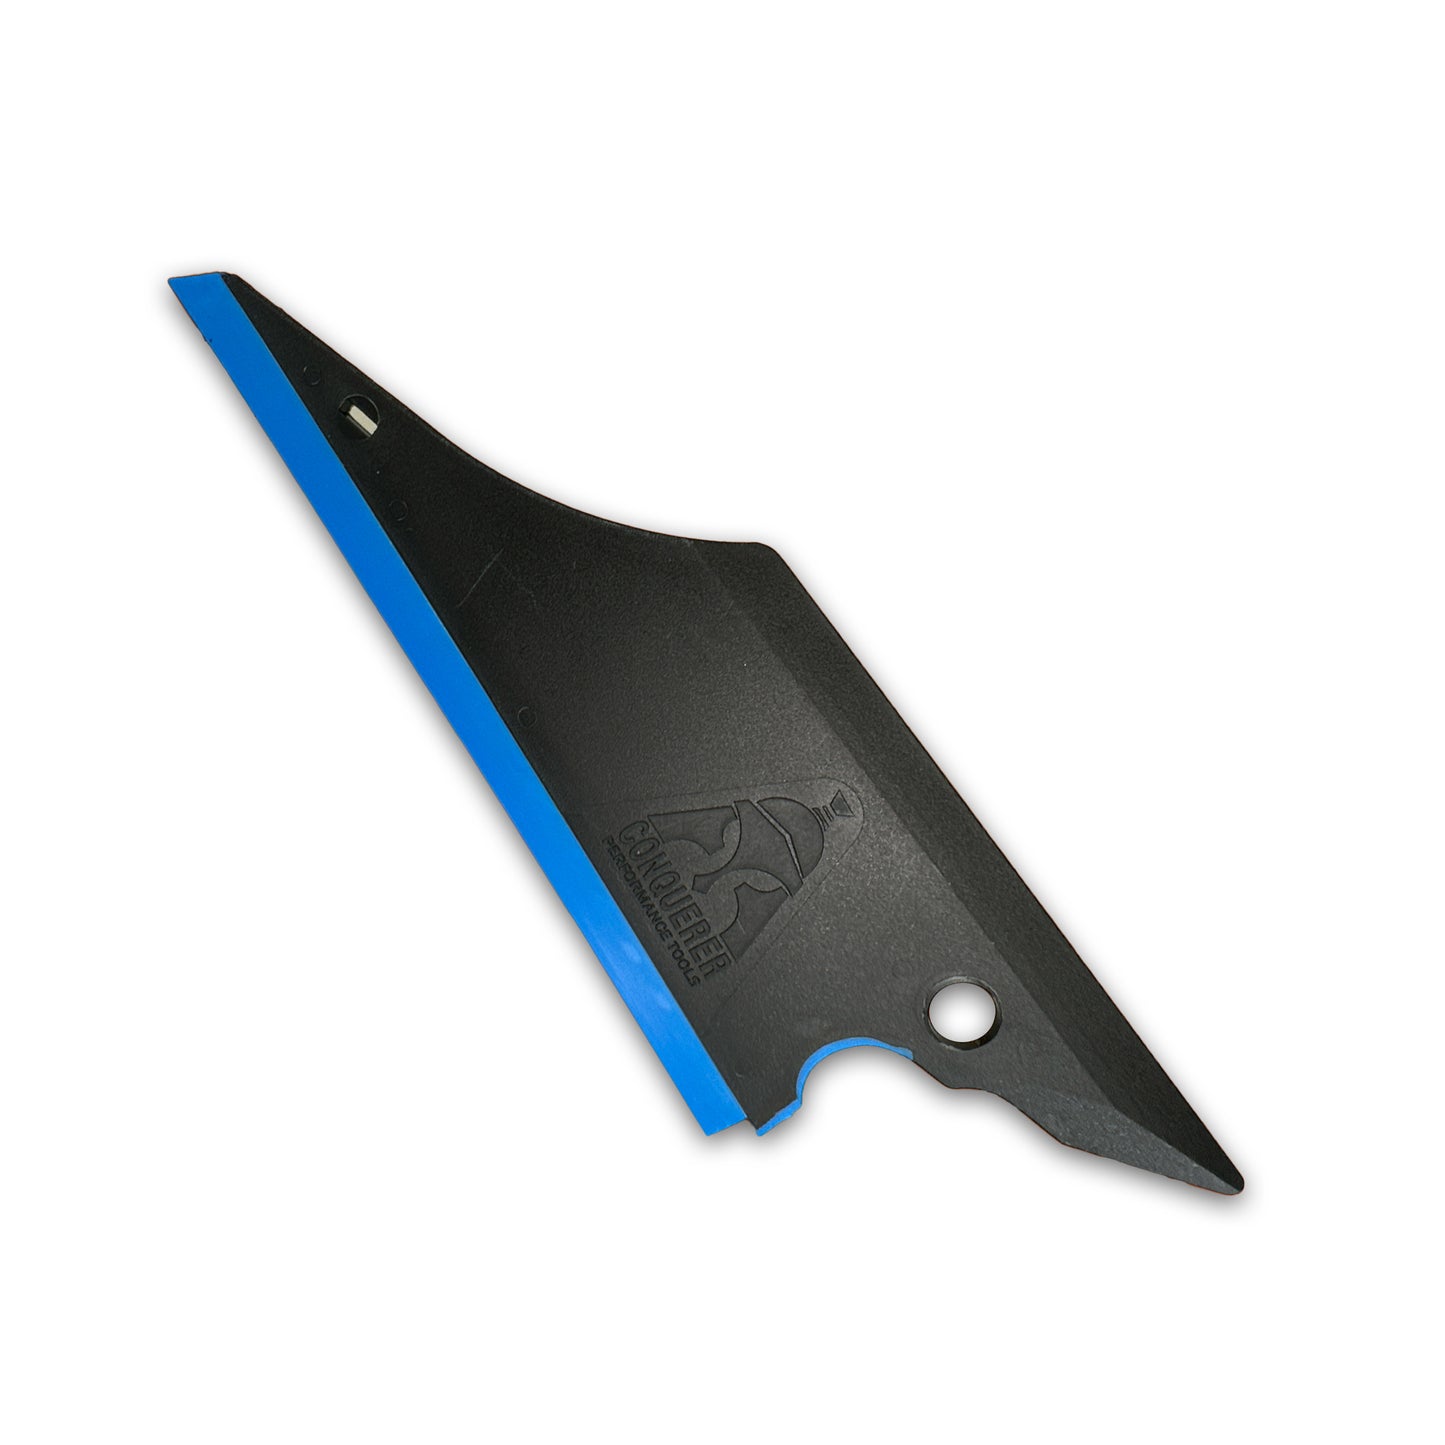 The Blue Conquerer Squeegee